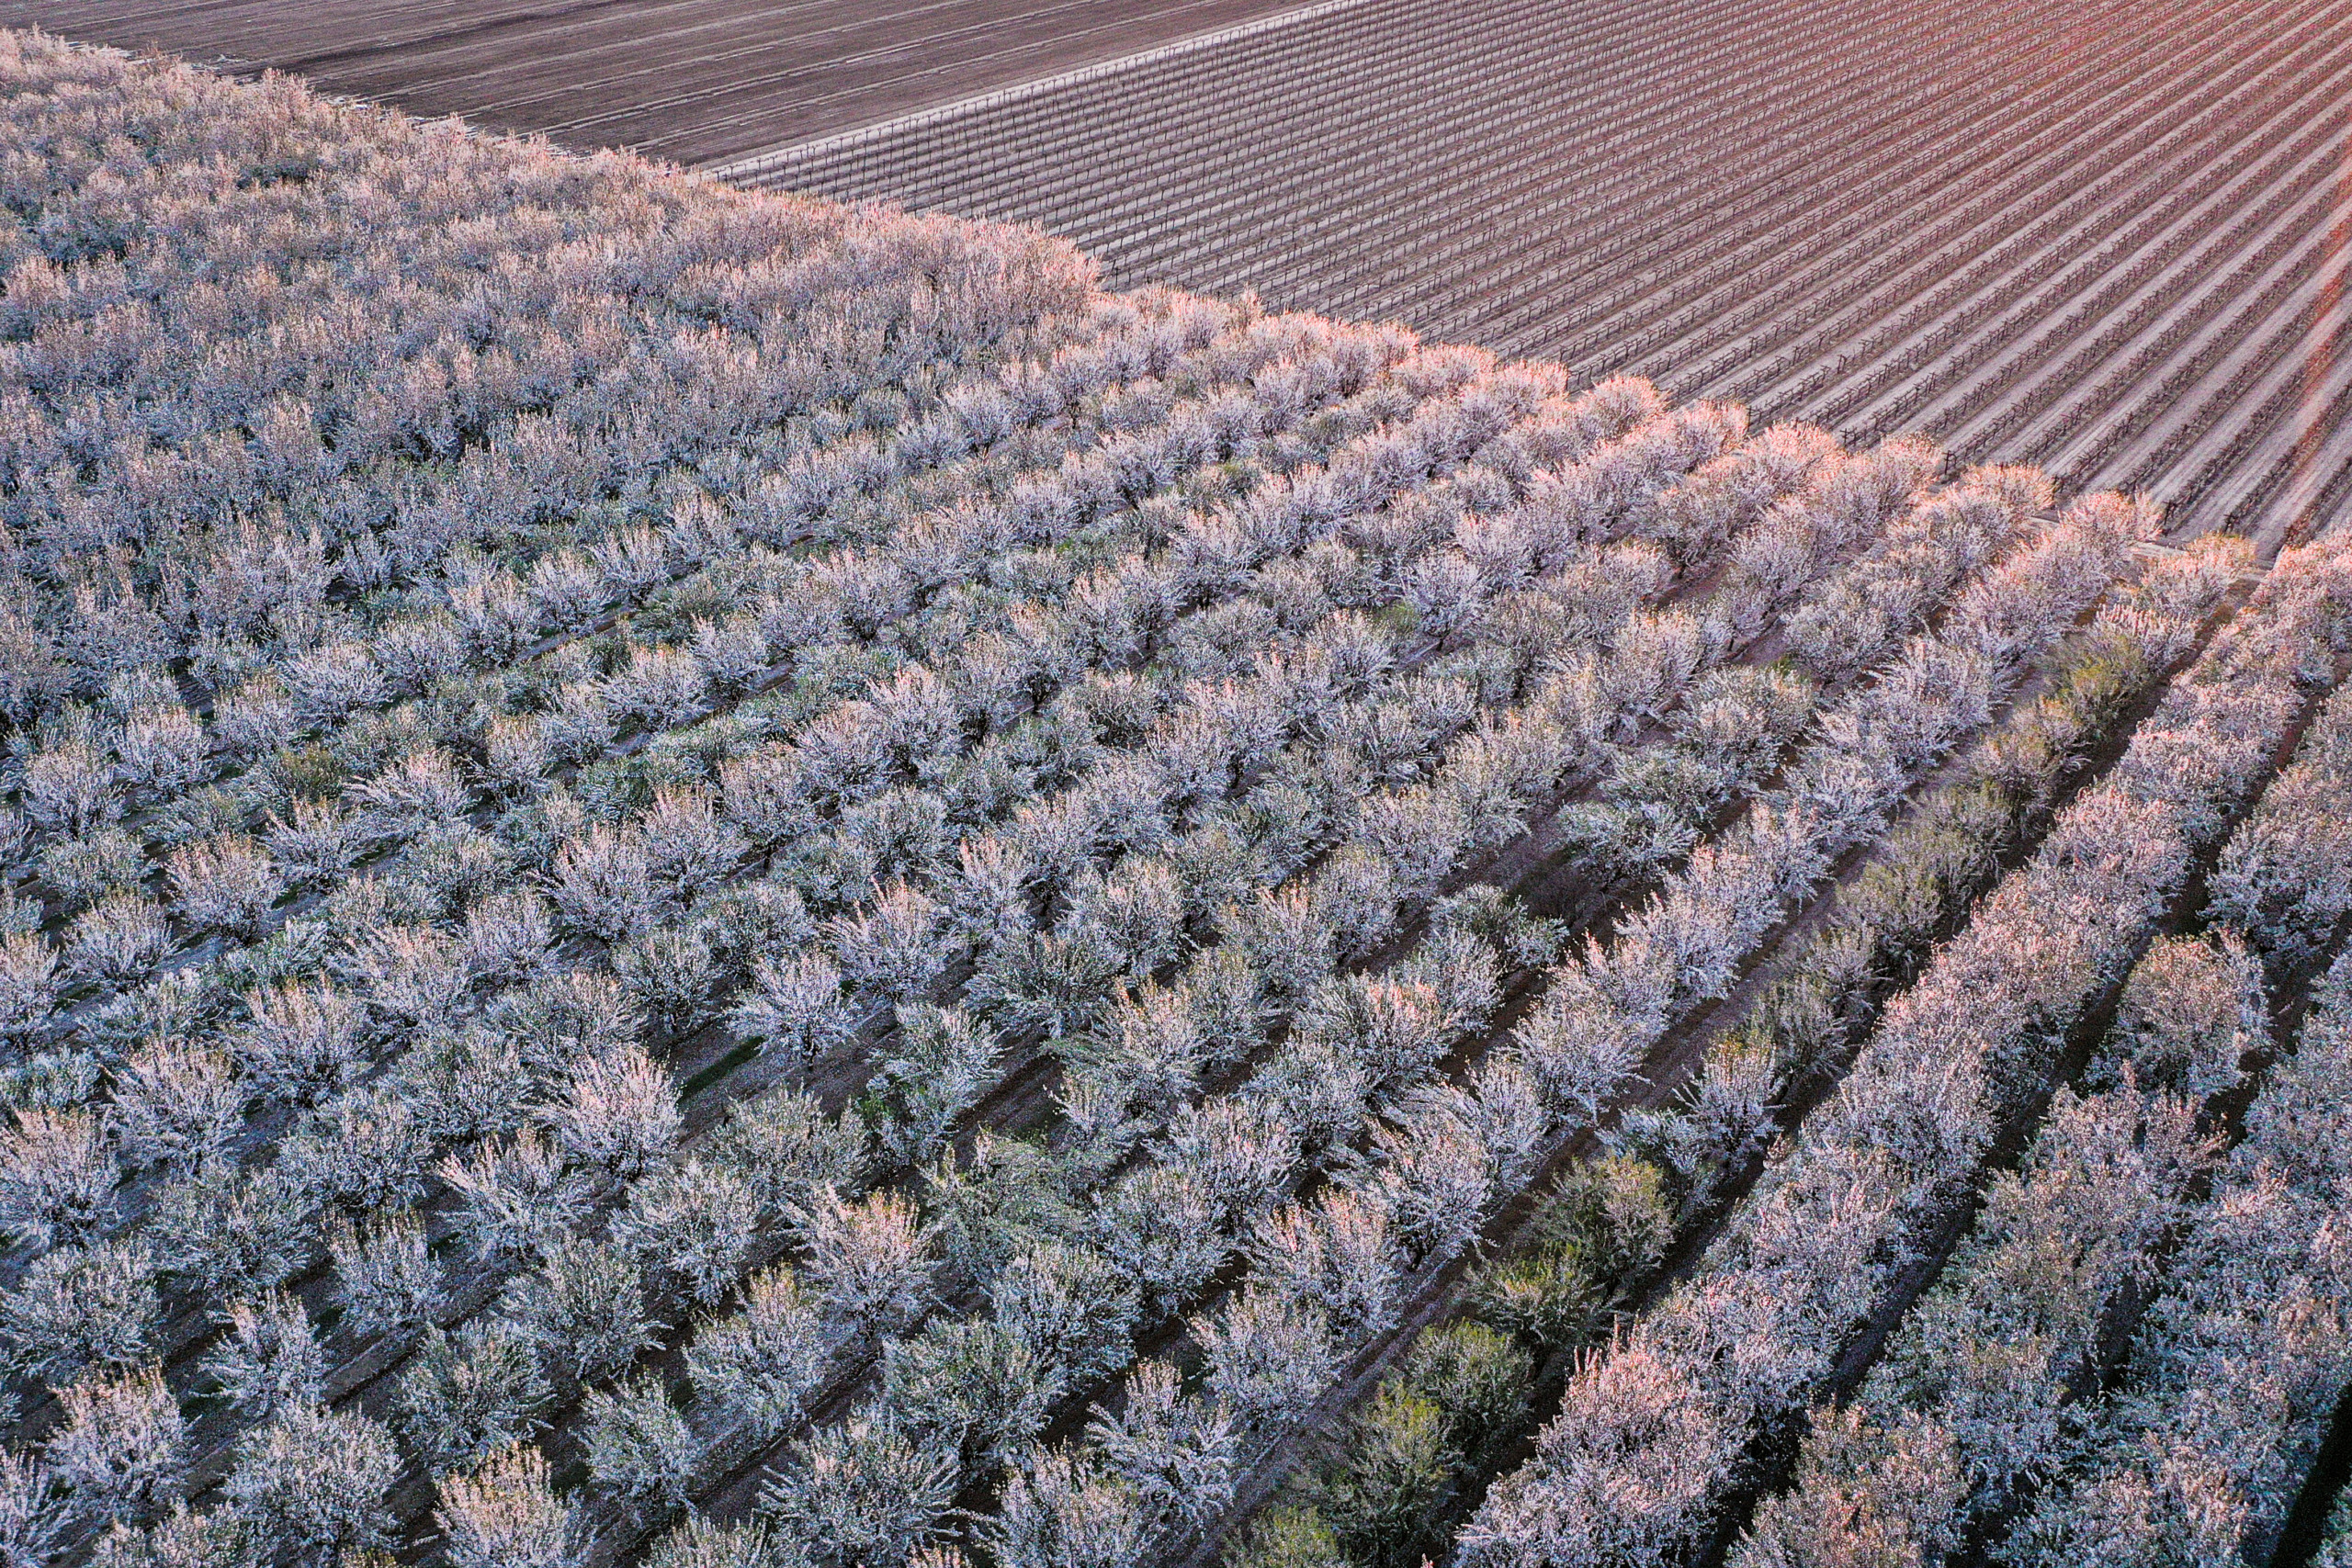 An orchard of almond trees in bloom at sunset